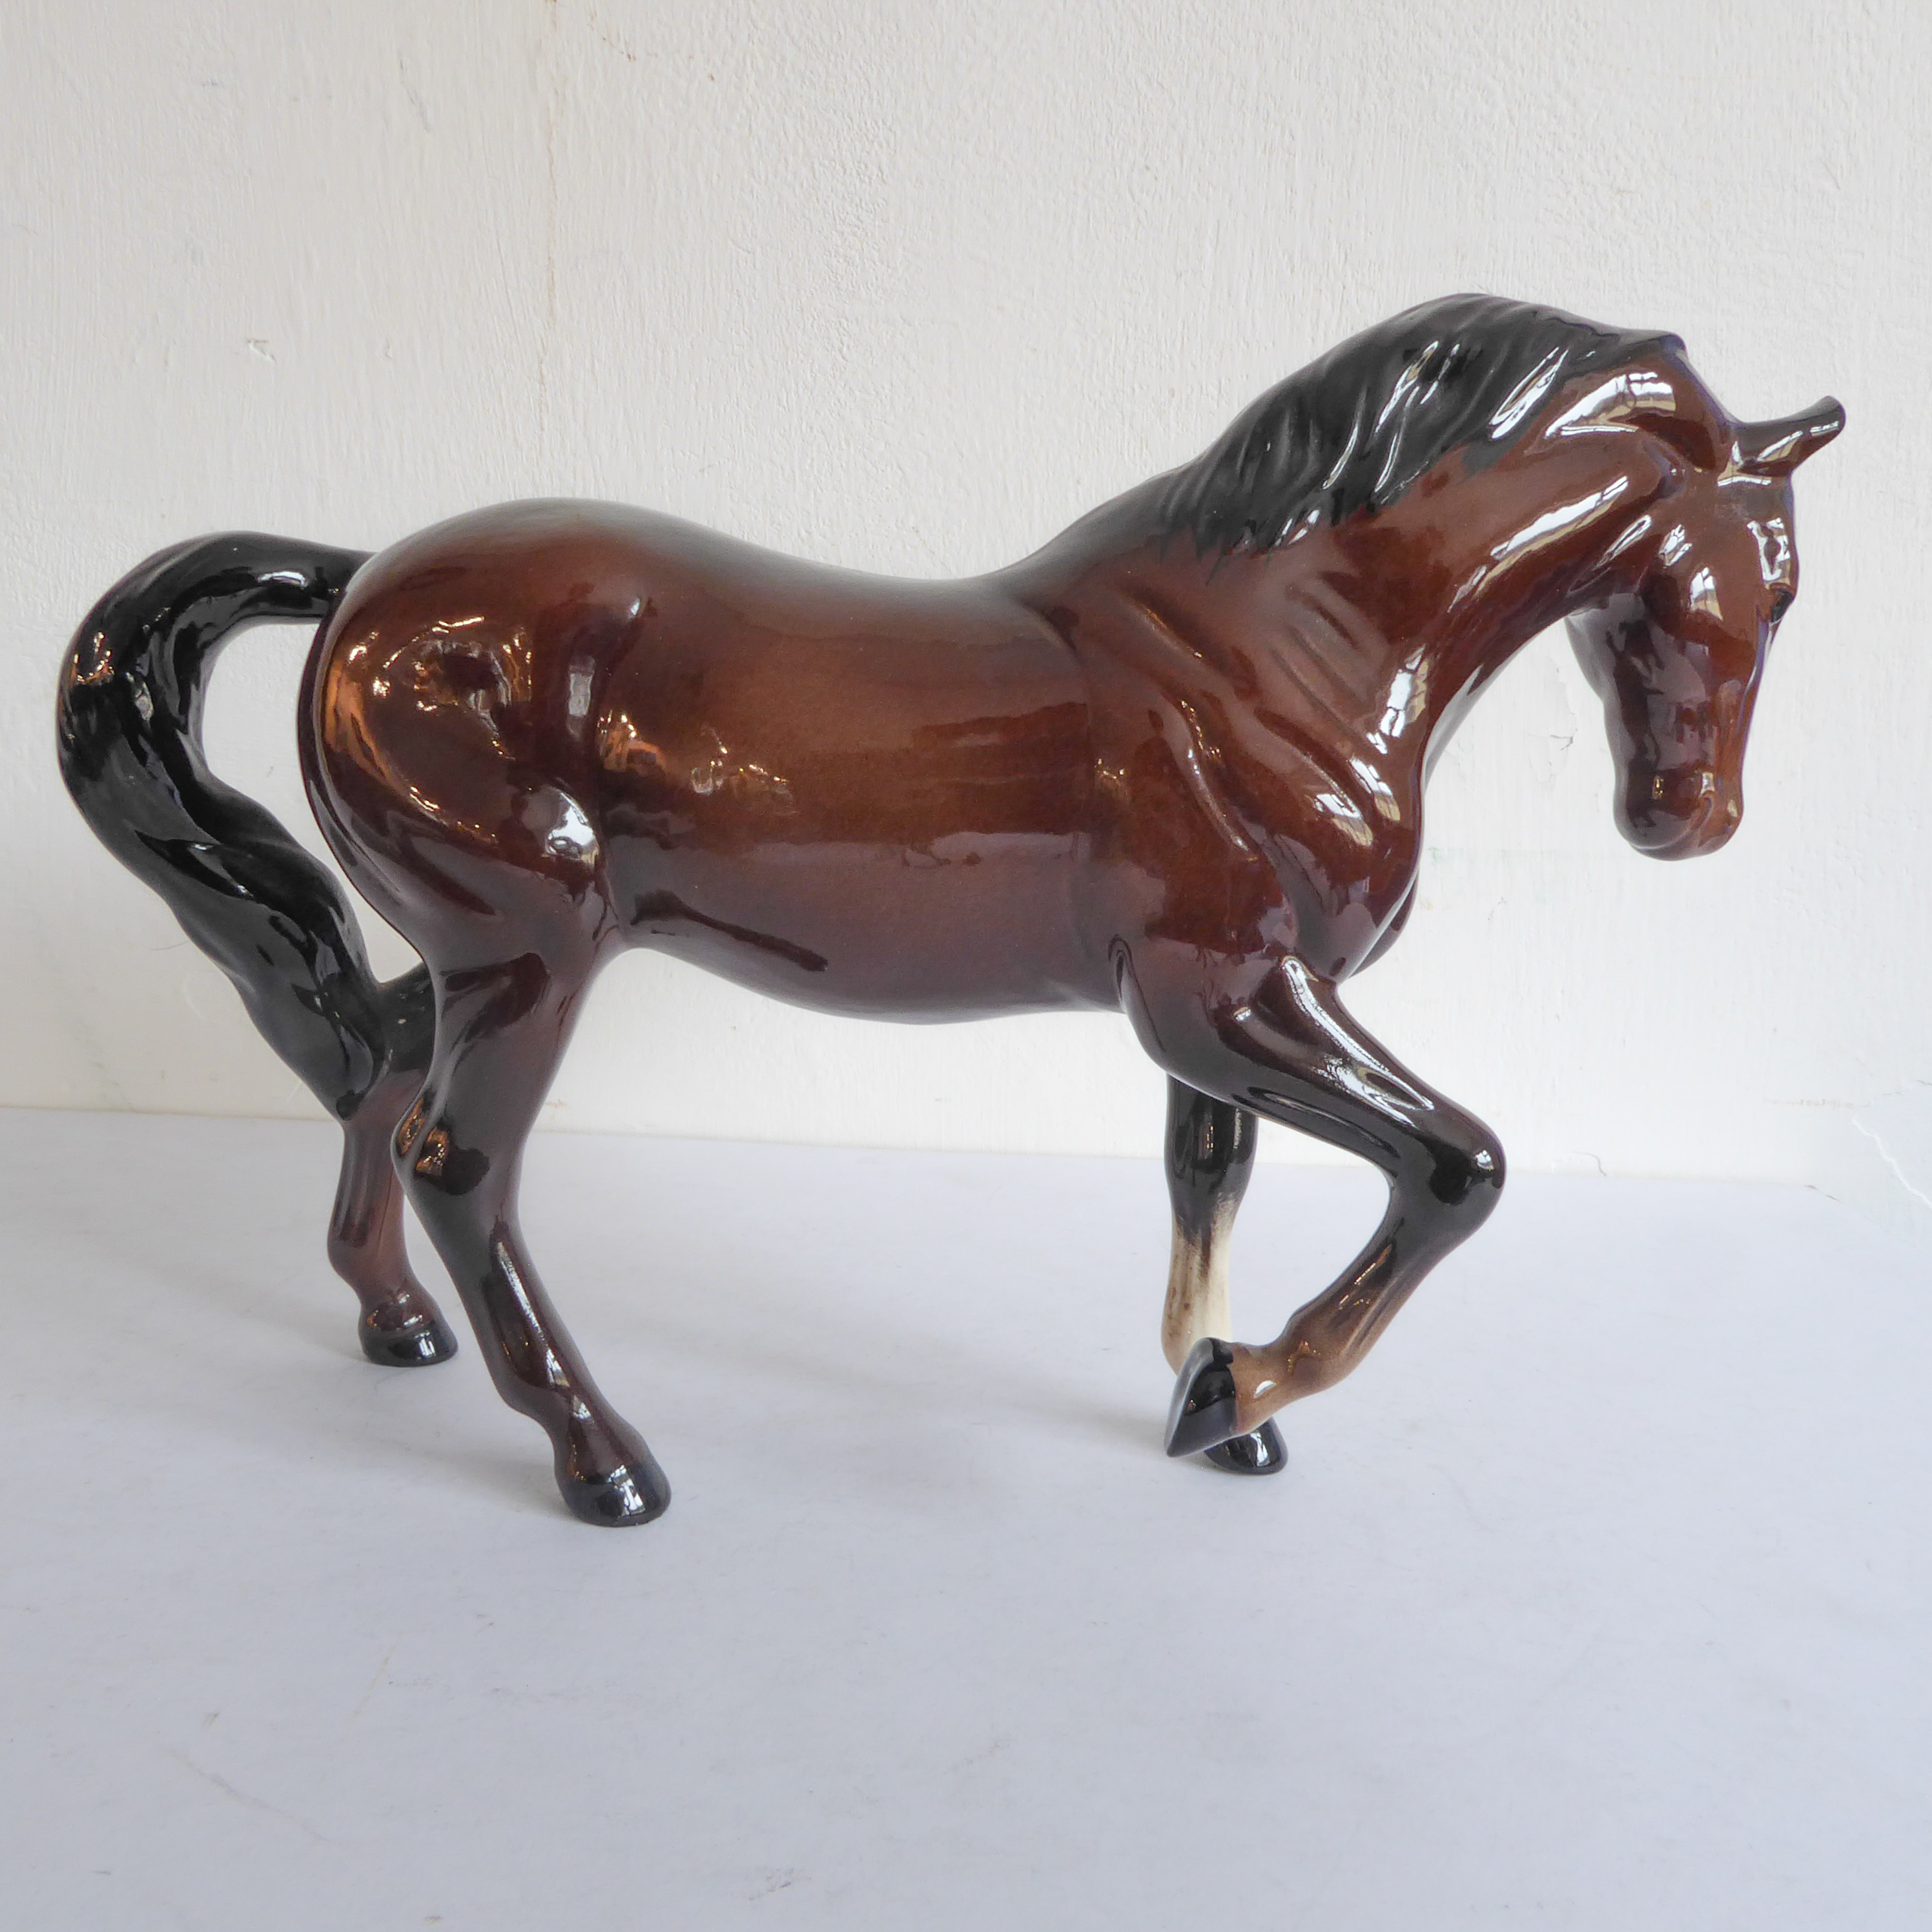 A Royal Doulton horse figurine, 'Stocky Jogging Mare' (1969-1979) (15cm high) - Image 3 of 4